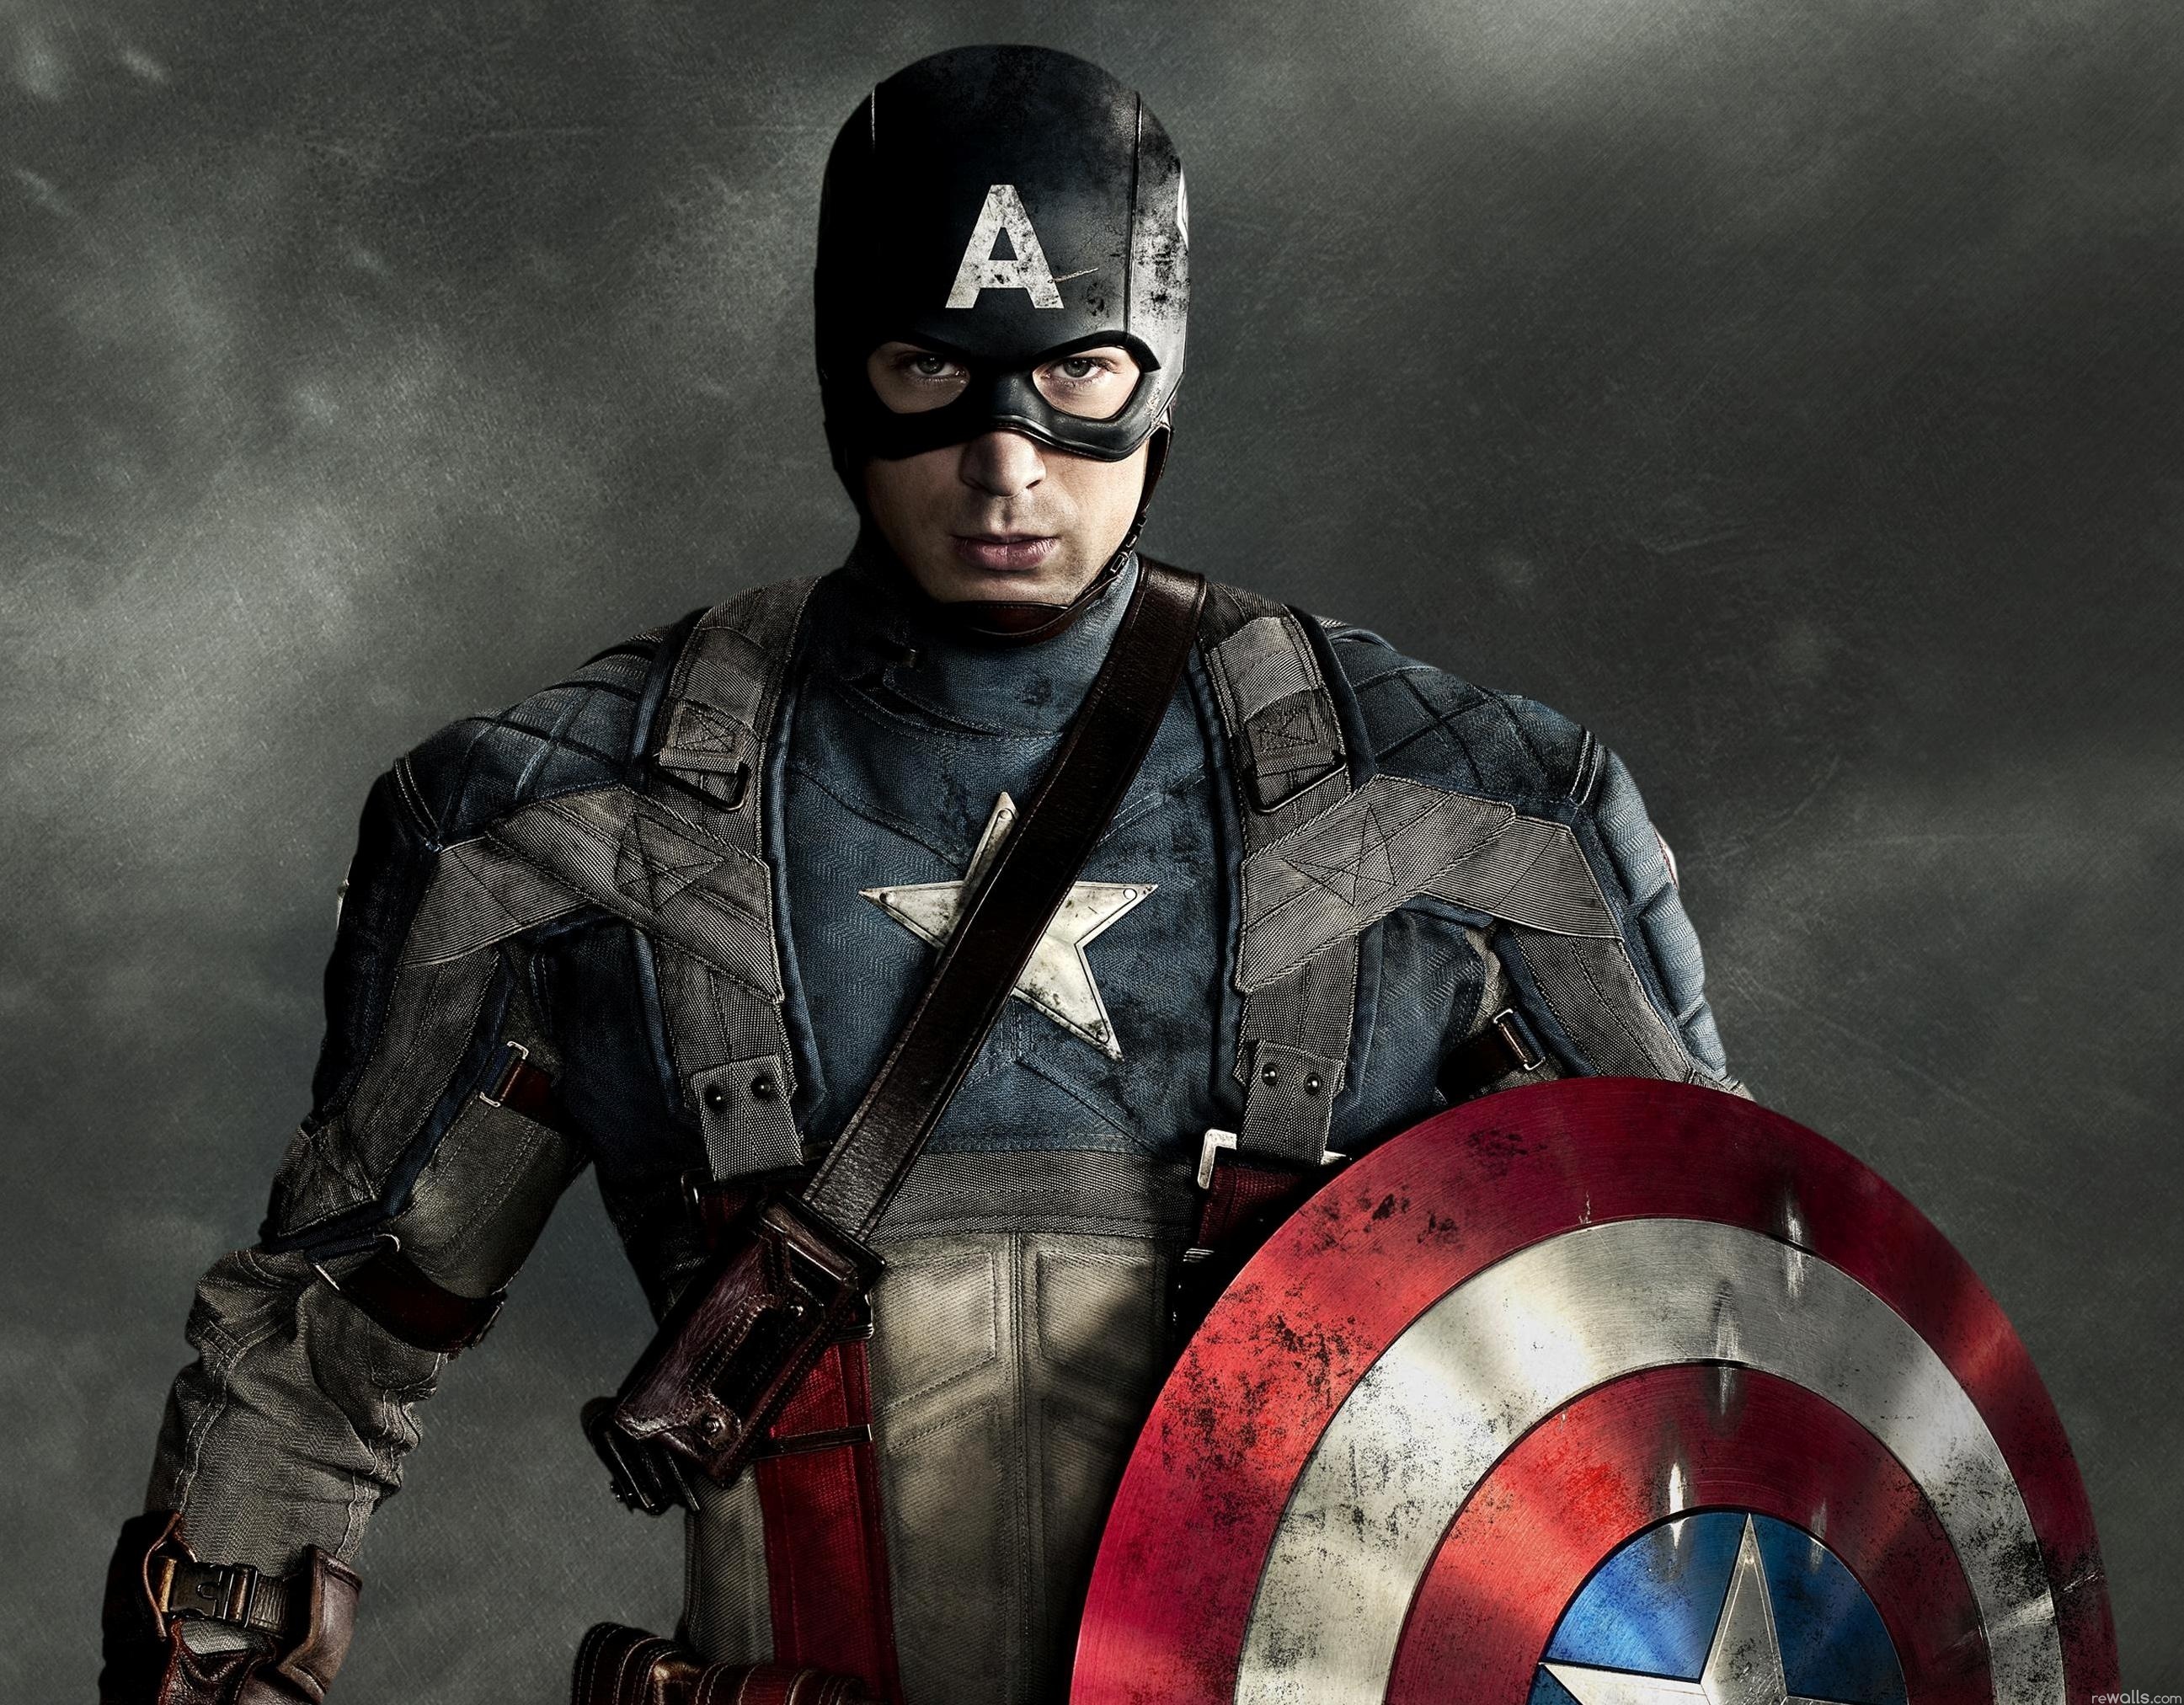 New Poster Debuts for ‘Captain America: The Winter Soldier’